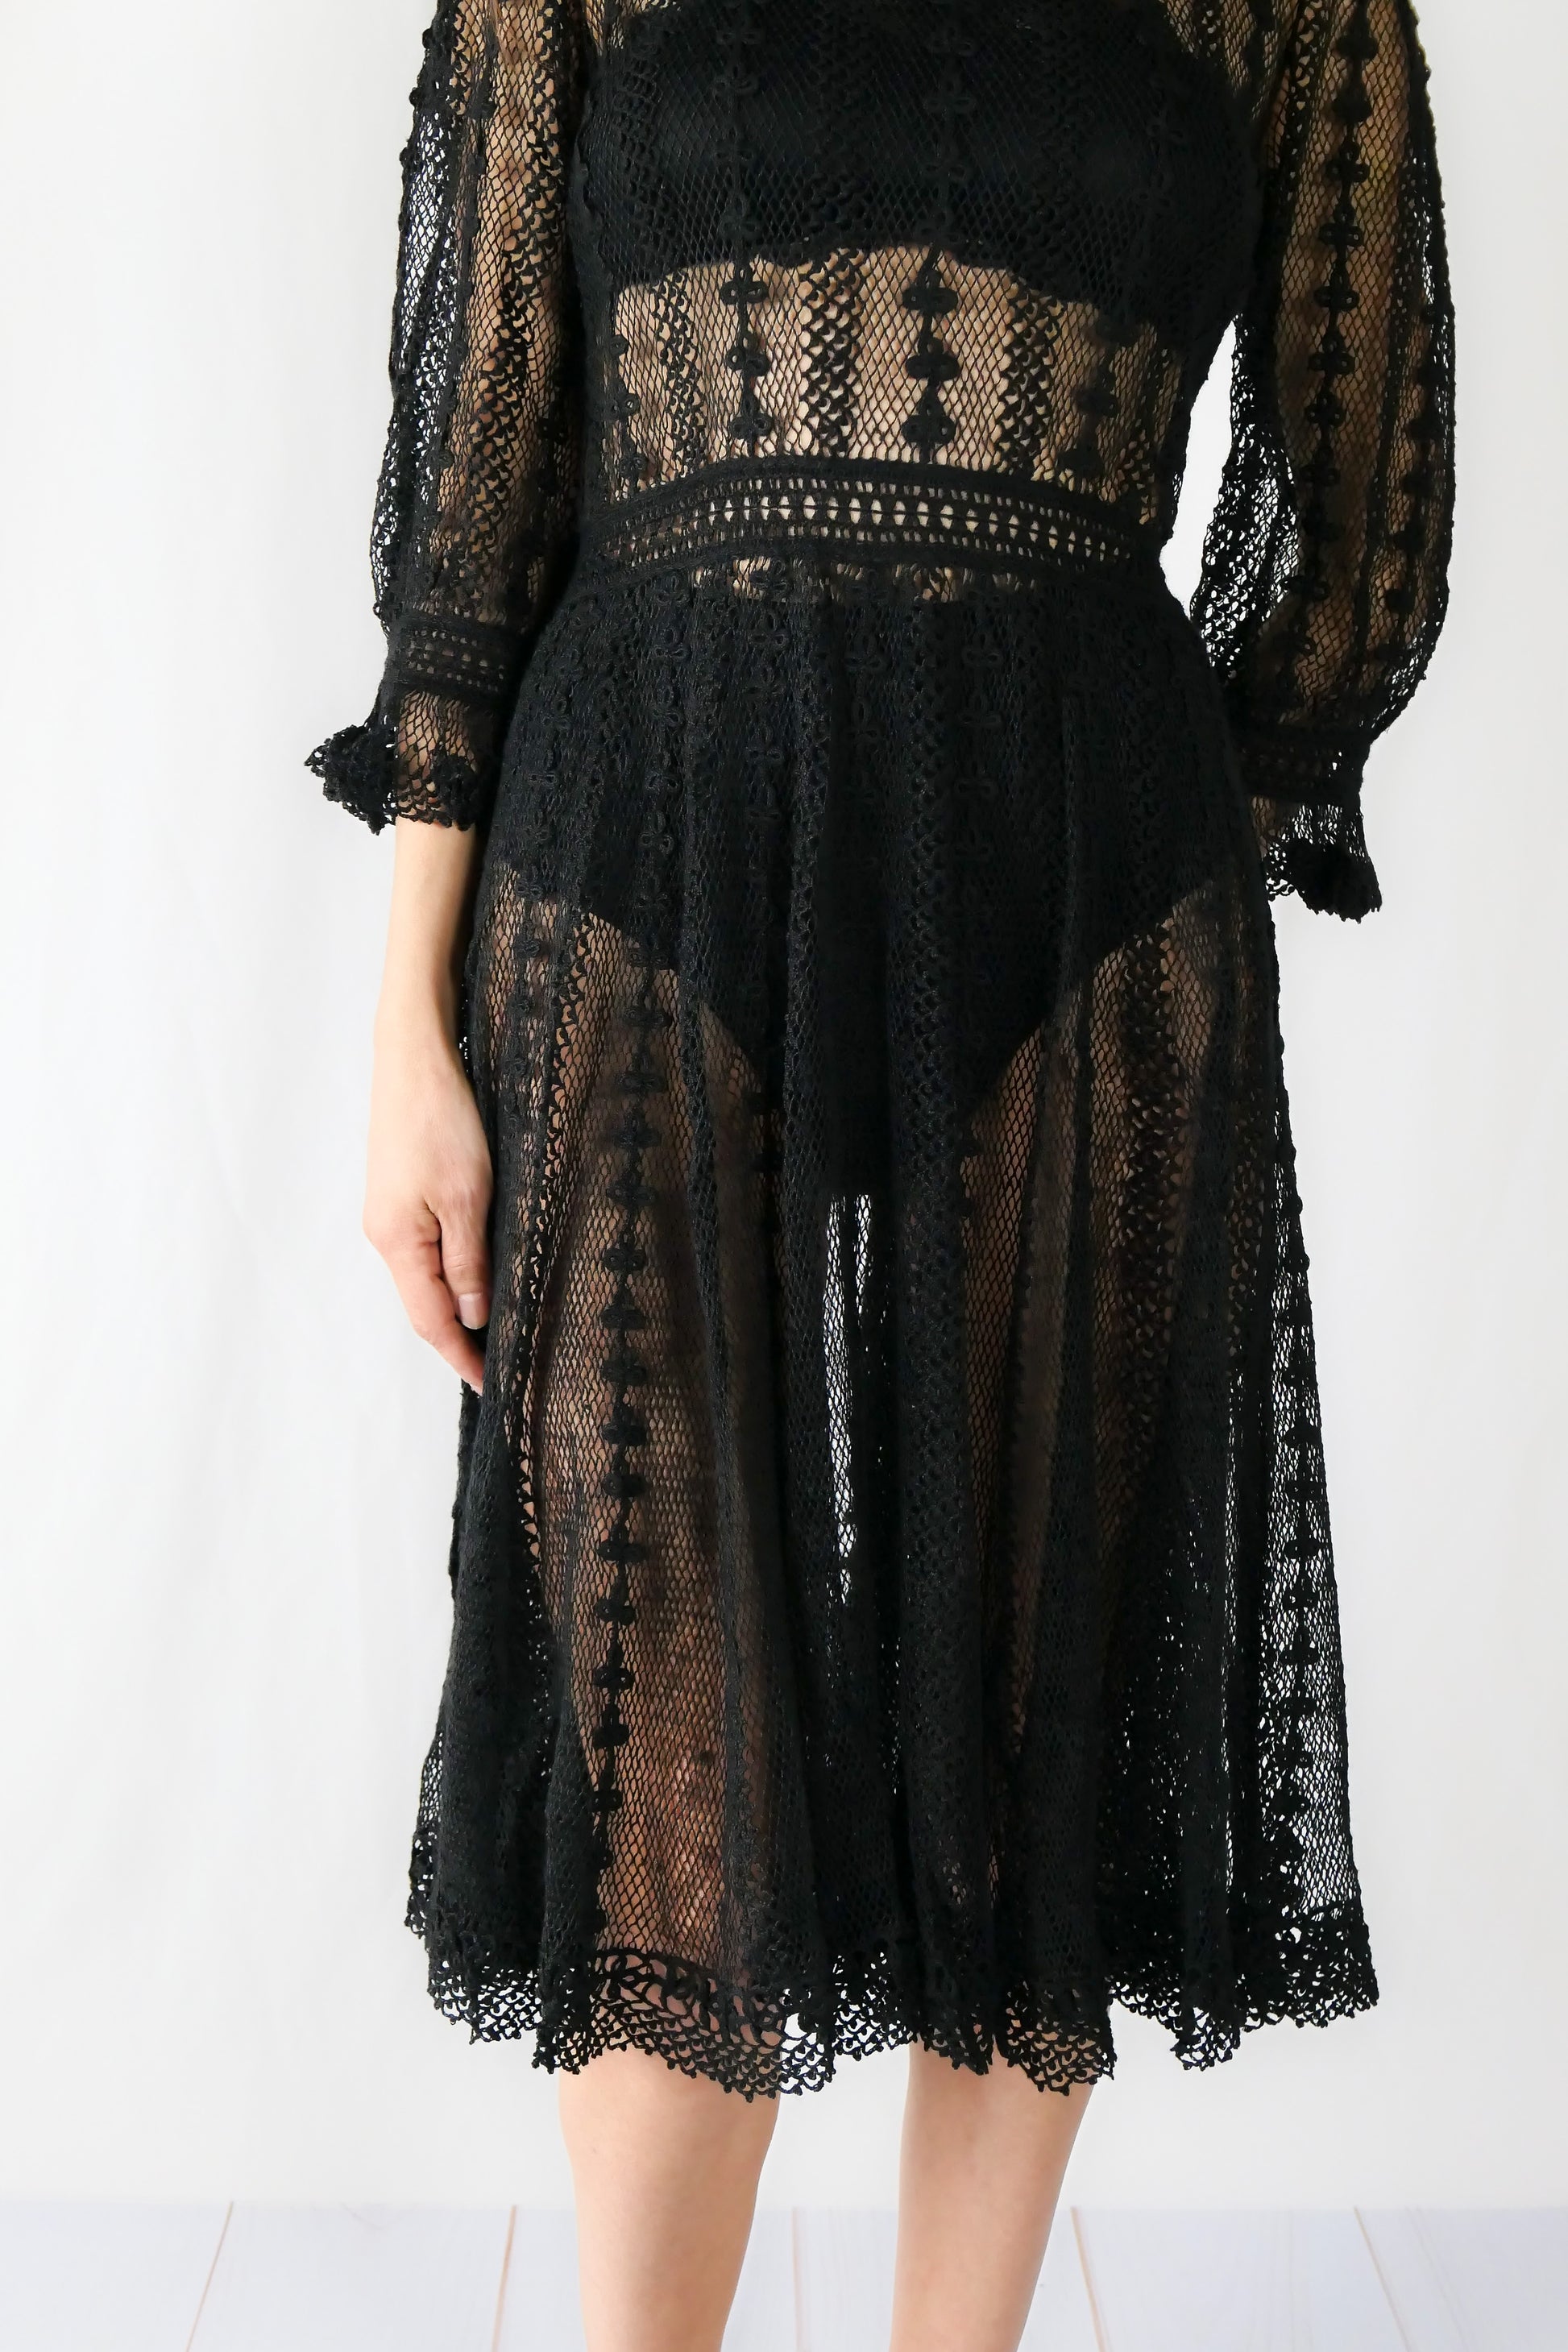 A beguiling black version of our cottage core style midi length crochet dress, this dreamy Lim's original vintage piece from the 1980s is made with very fine threads, creating a refined and sheer look. Detailed crochet trim is used at the waist, hemline, and 3/4 length ruffled sleeves. Measurements: Bust 36” Waist 30” Length 42” Shoulder width 15” Sleeve 20” Cuff circumference 9" Color: Black